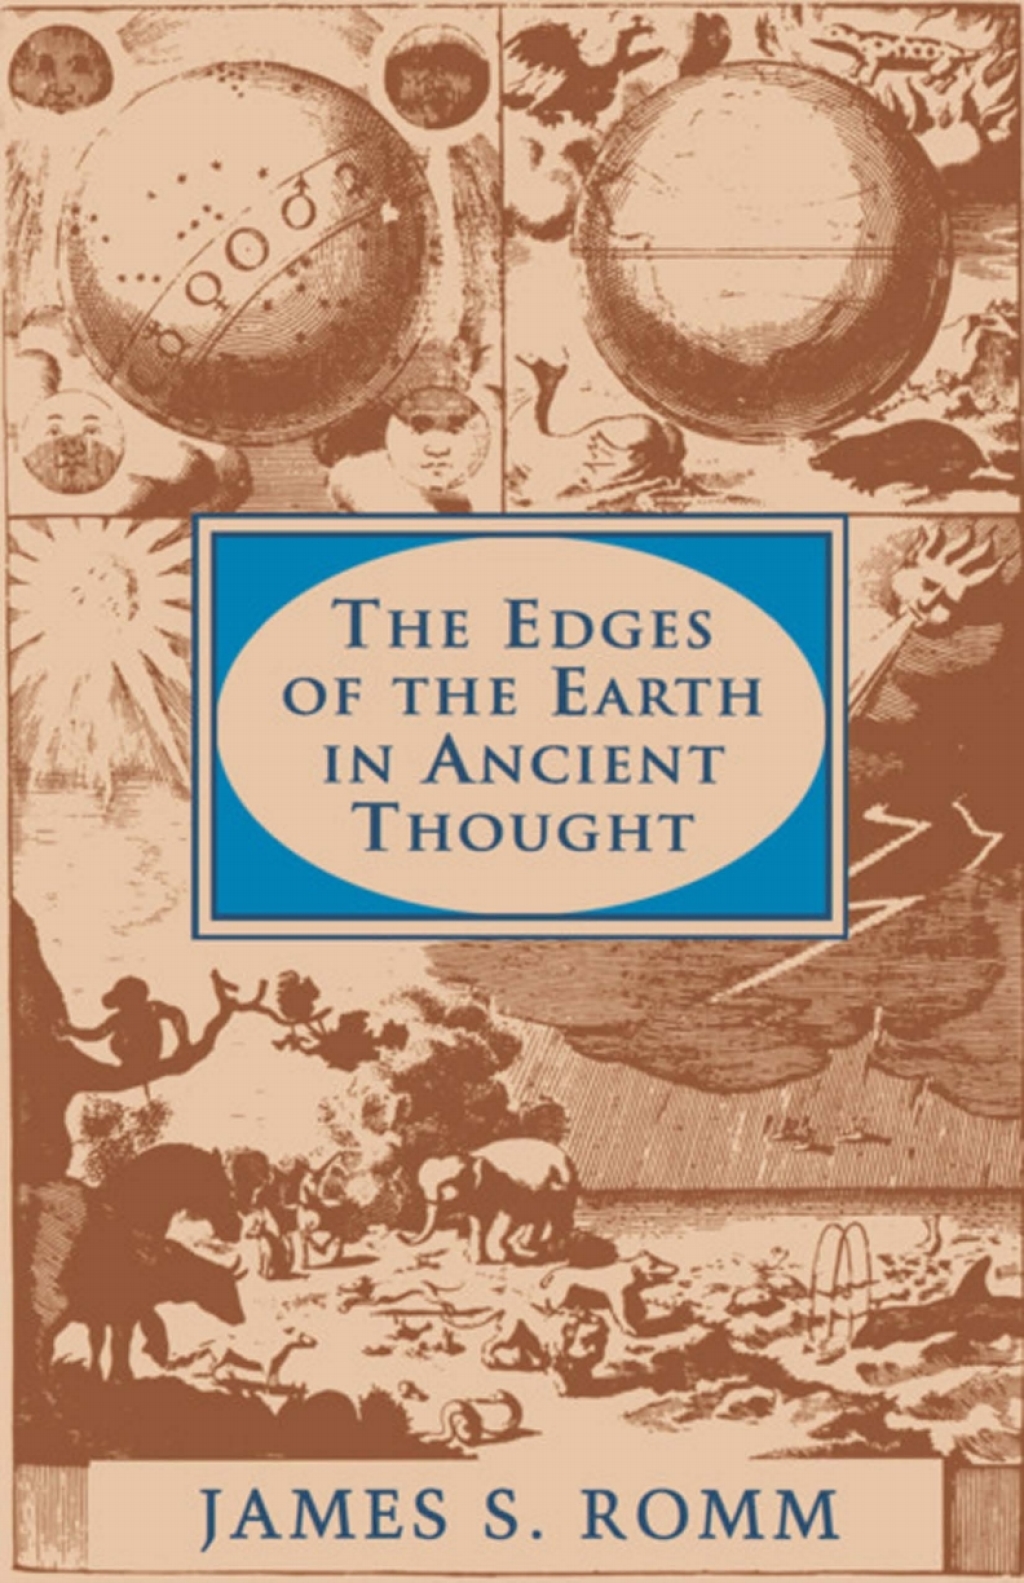 The Edges of the Earth in Ancient Thought (eBook) - James S. Romm,